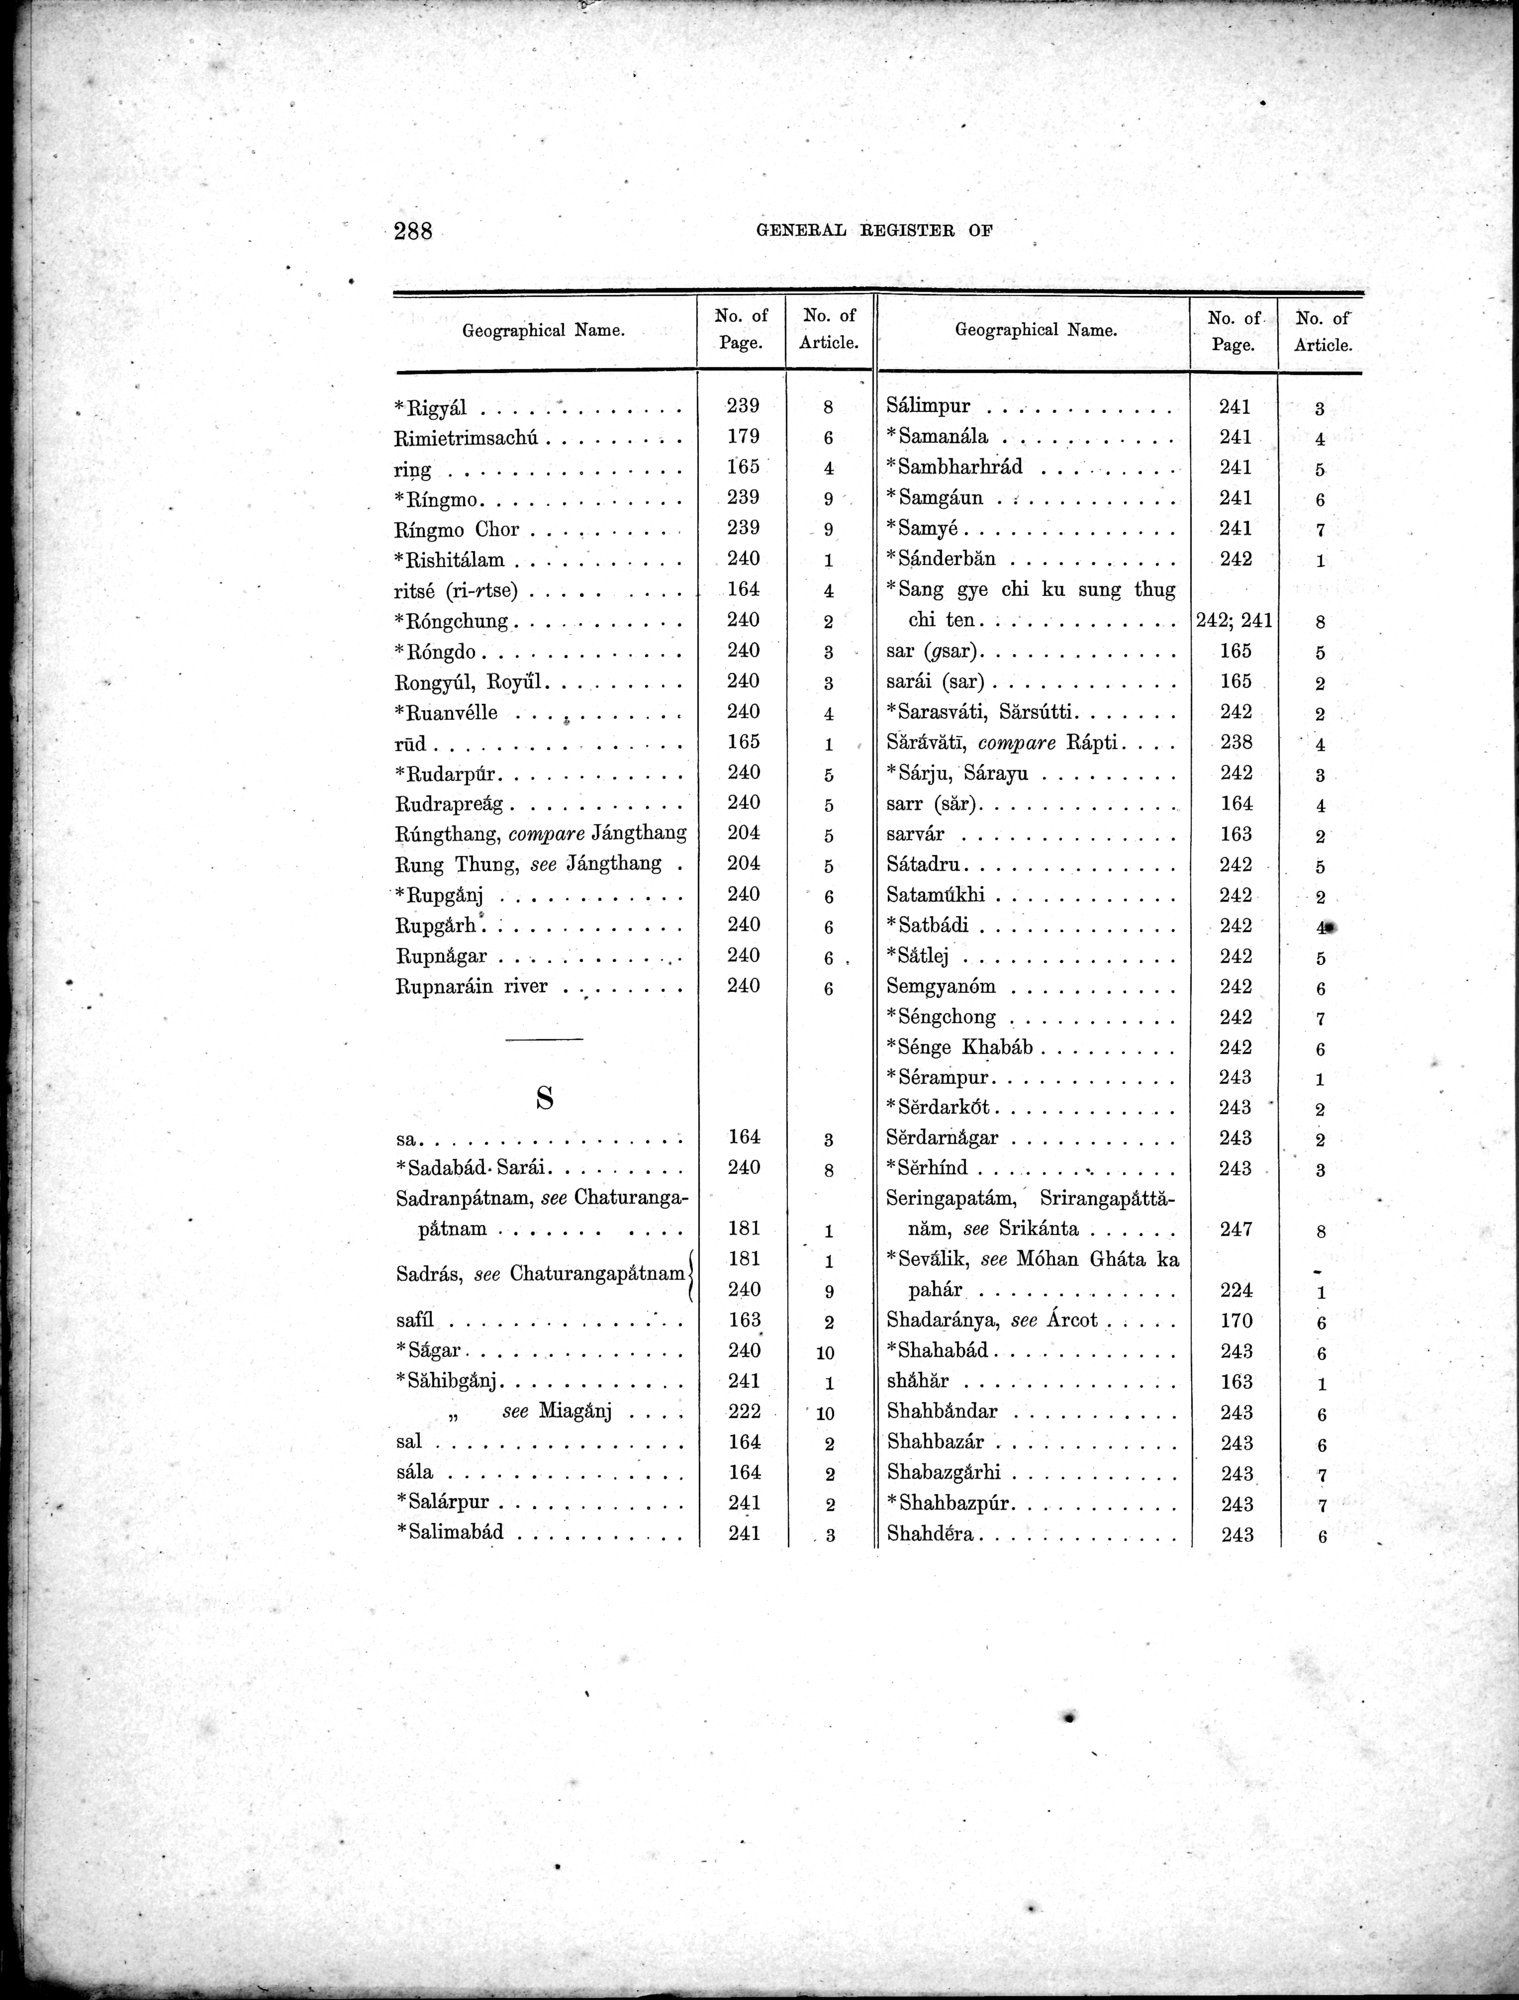 Results of a Scientific Mission to India and High Asia : vol.3 / Page 320 (Grayscale High Resolution Image)